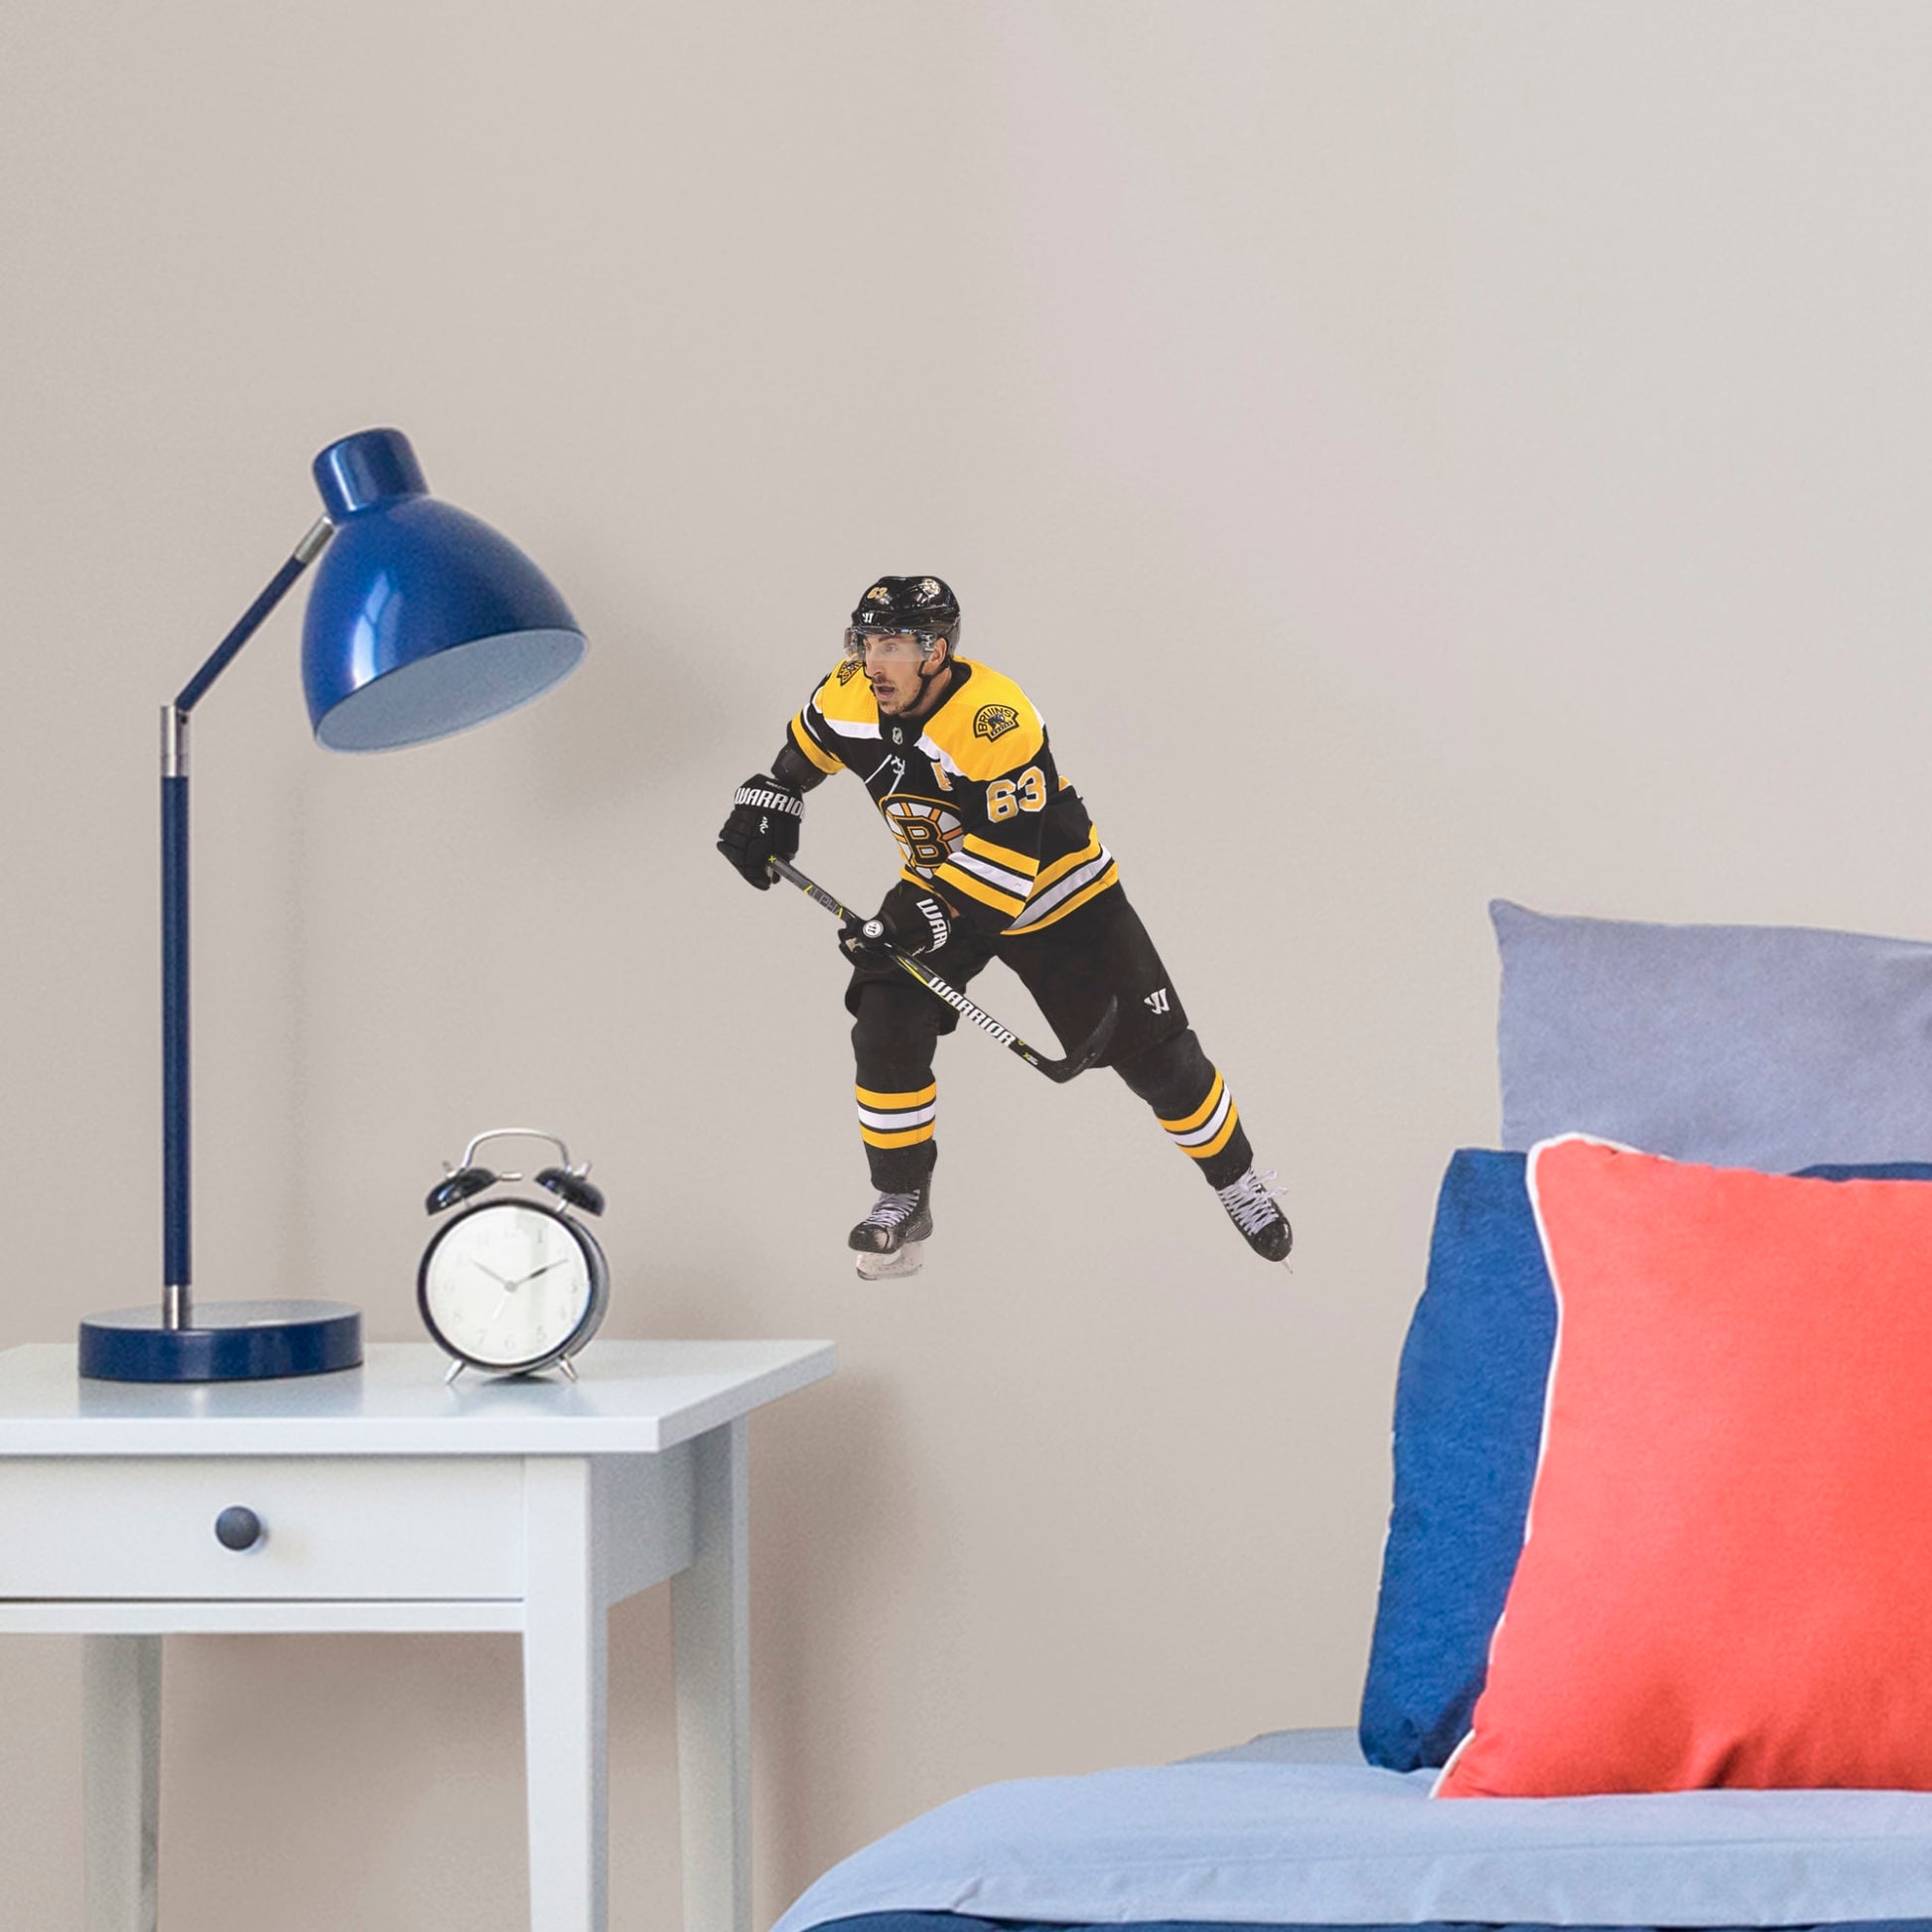 Large Athlete + 2 Decals (12"W x 15"H) Bruins fans know that the opposing team should be scared when Brad Marchand hits the ice, and now you can bring that action to life in your own home with this Officially Licensed NHL Removable Wall Decal! Seen here in the Boston home uniform, this removable and reusable decal of Marchand is bold and durable, making it the perfect addition to your bedroom, office, or fan room. Go Bruins!